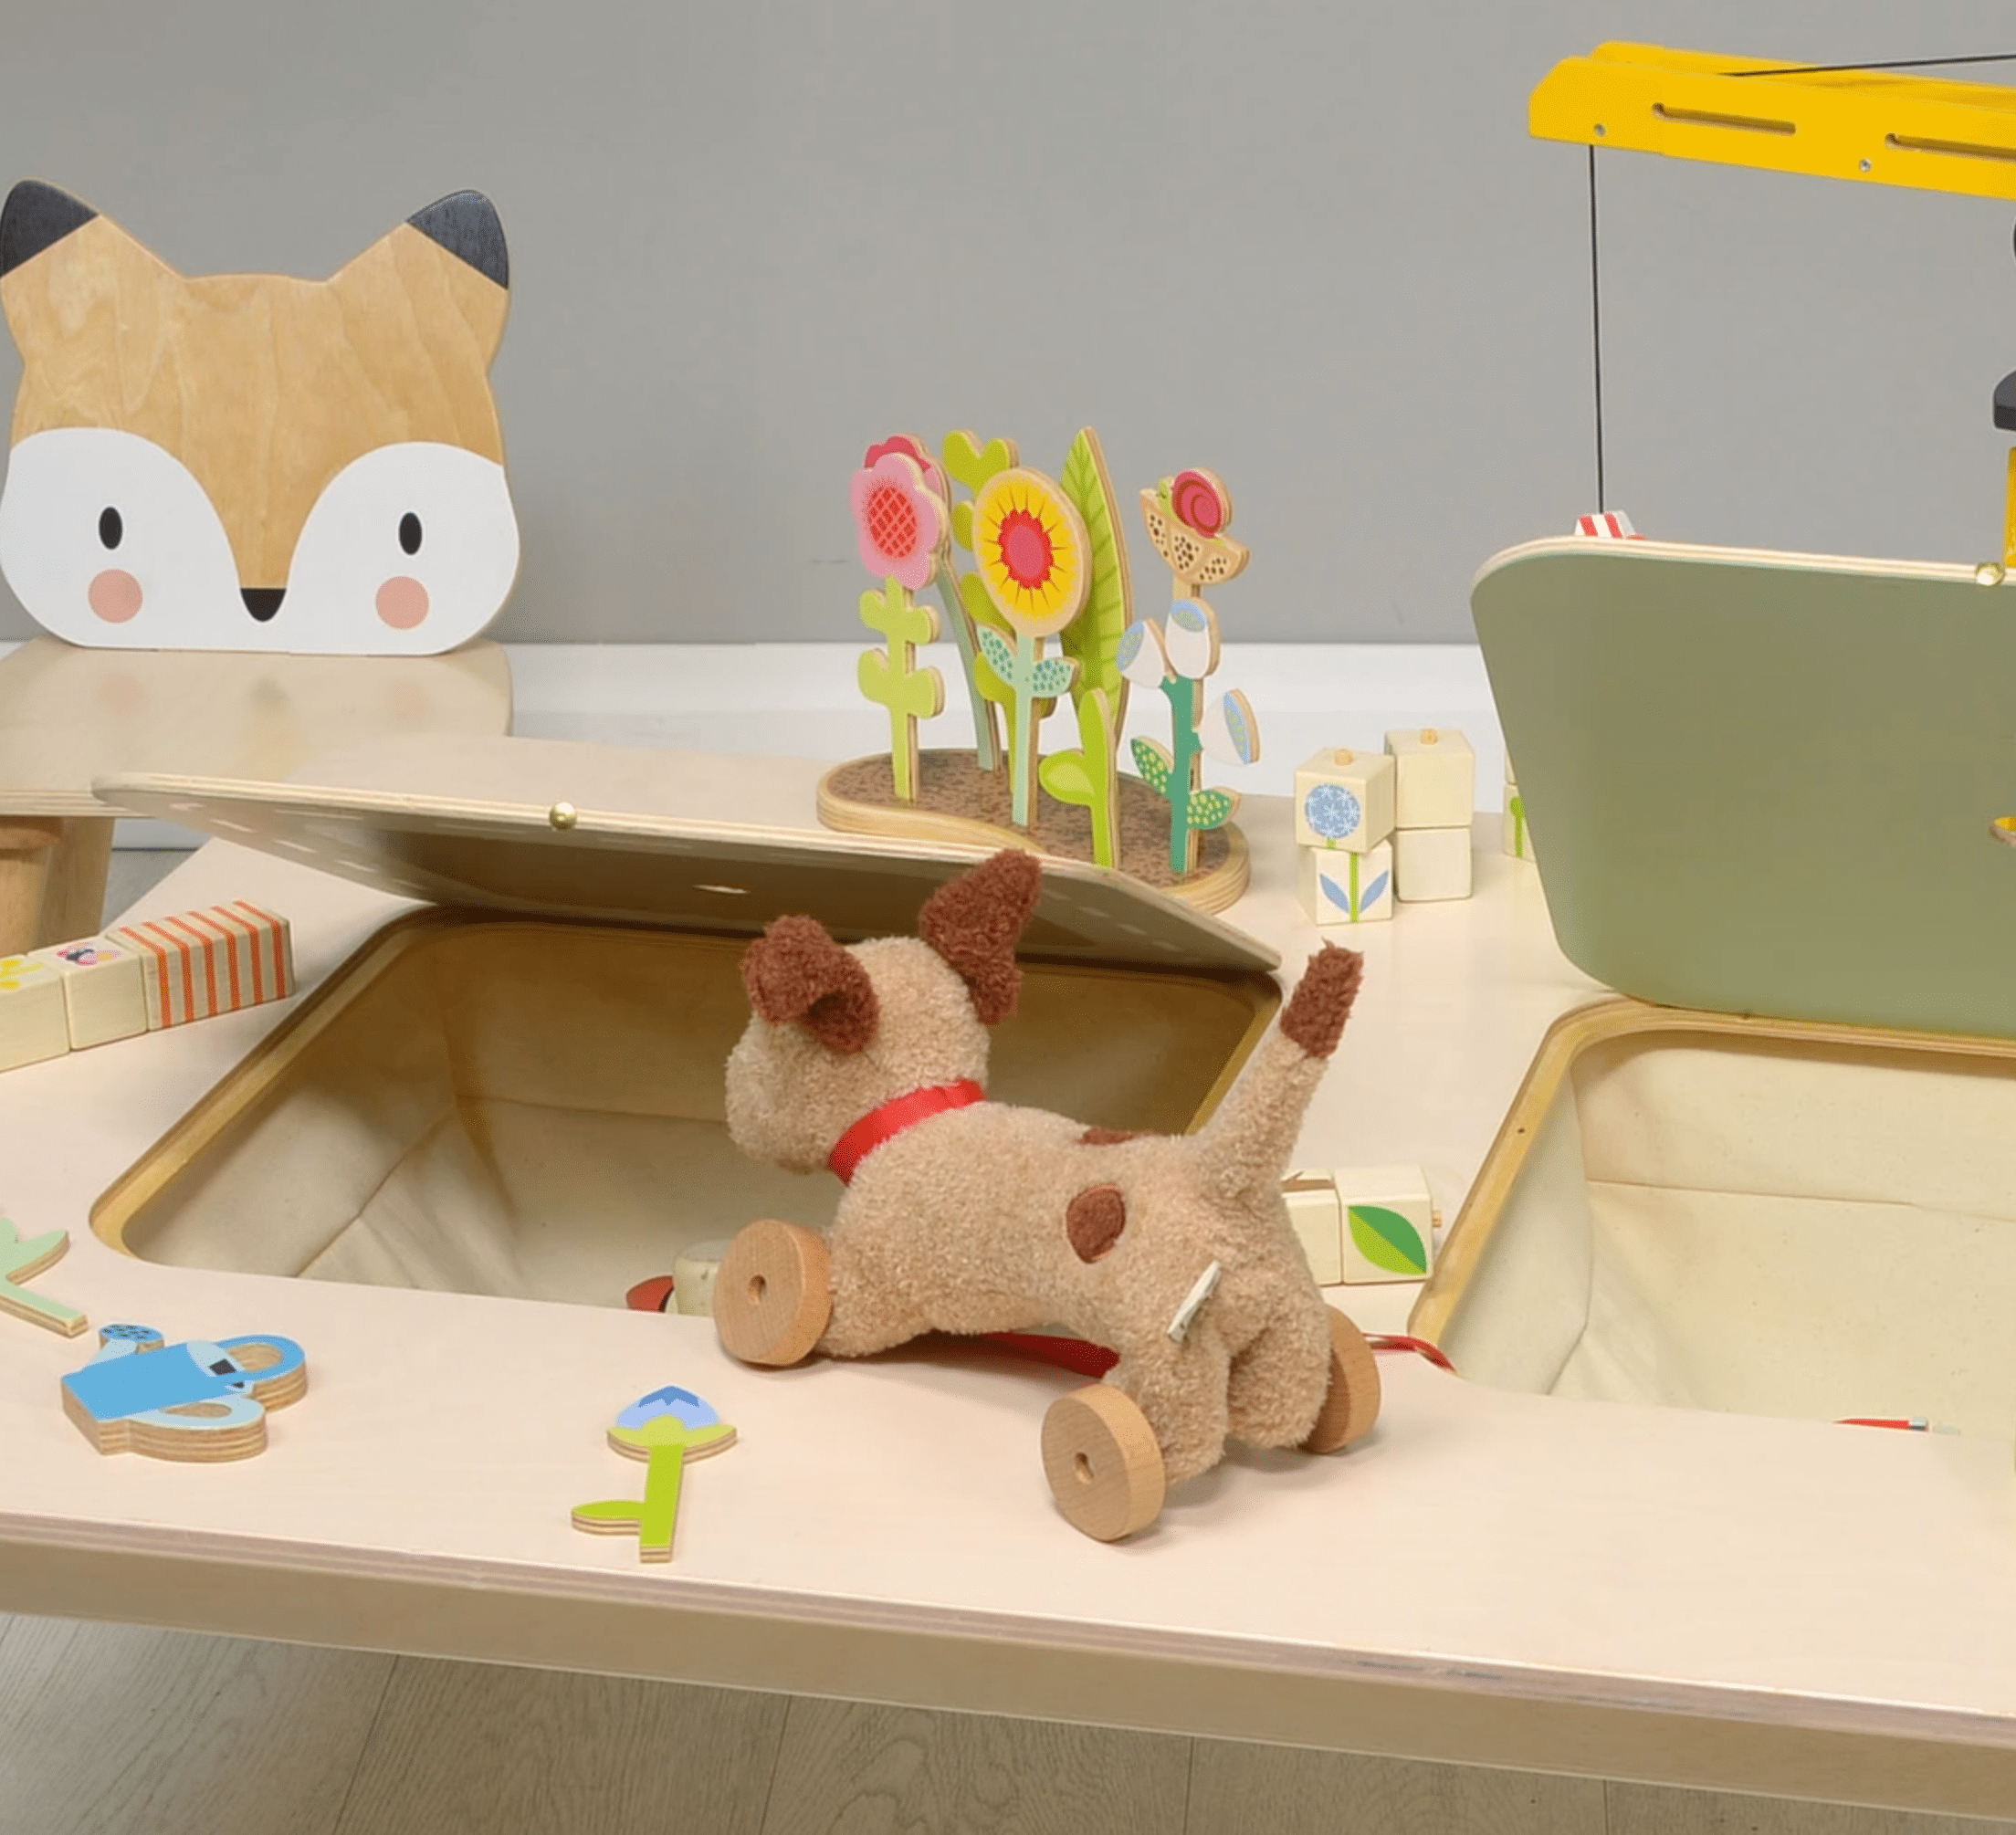 Tender Leaf Toys wooden furniture Play Table